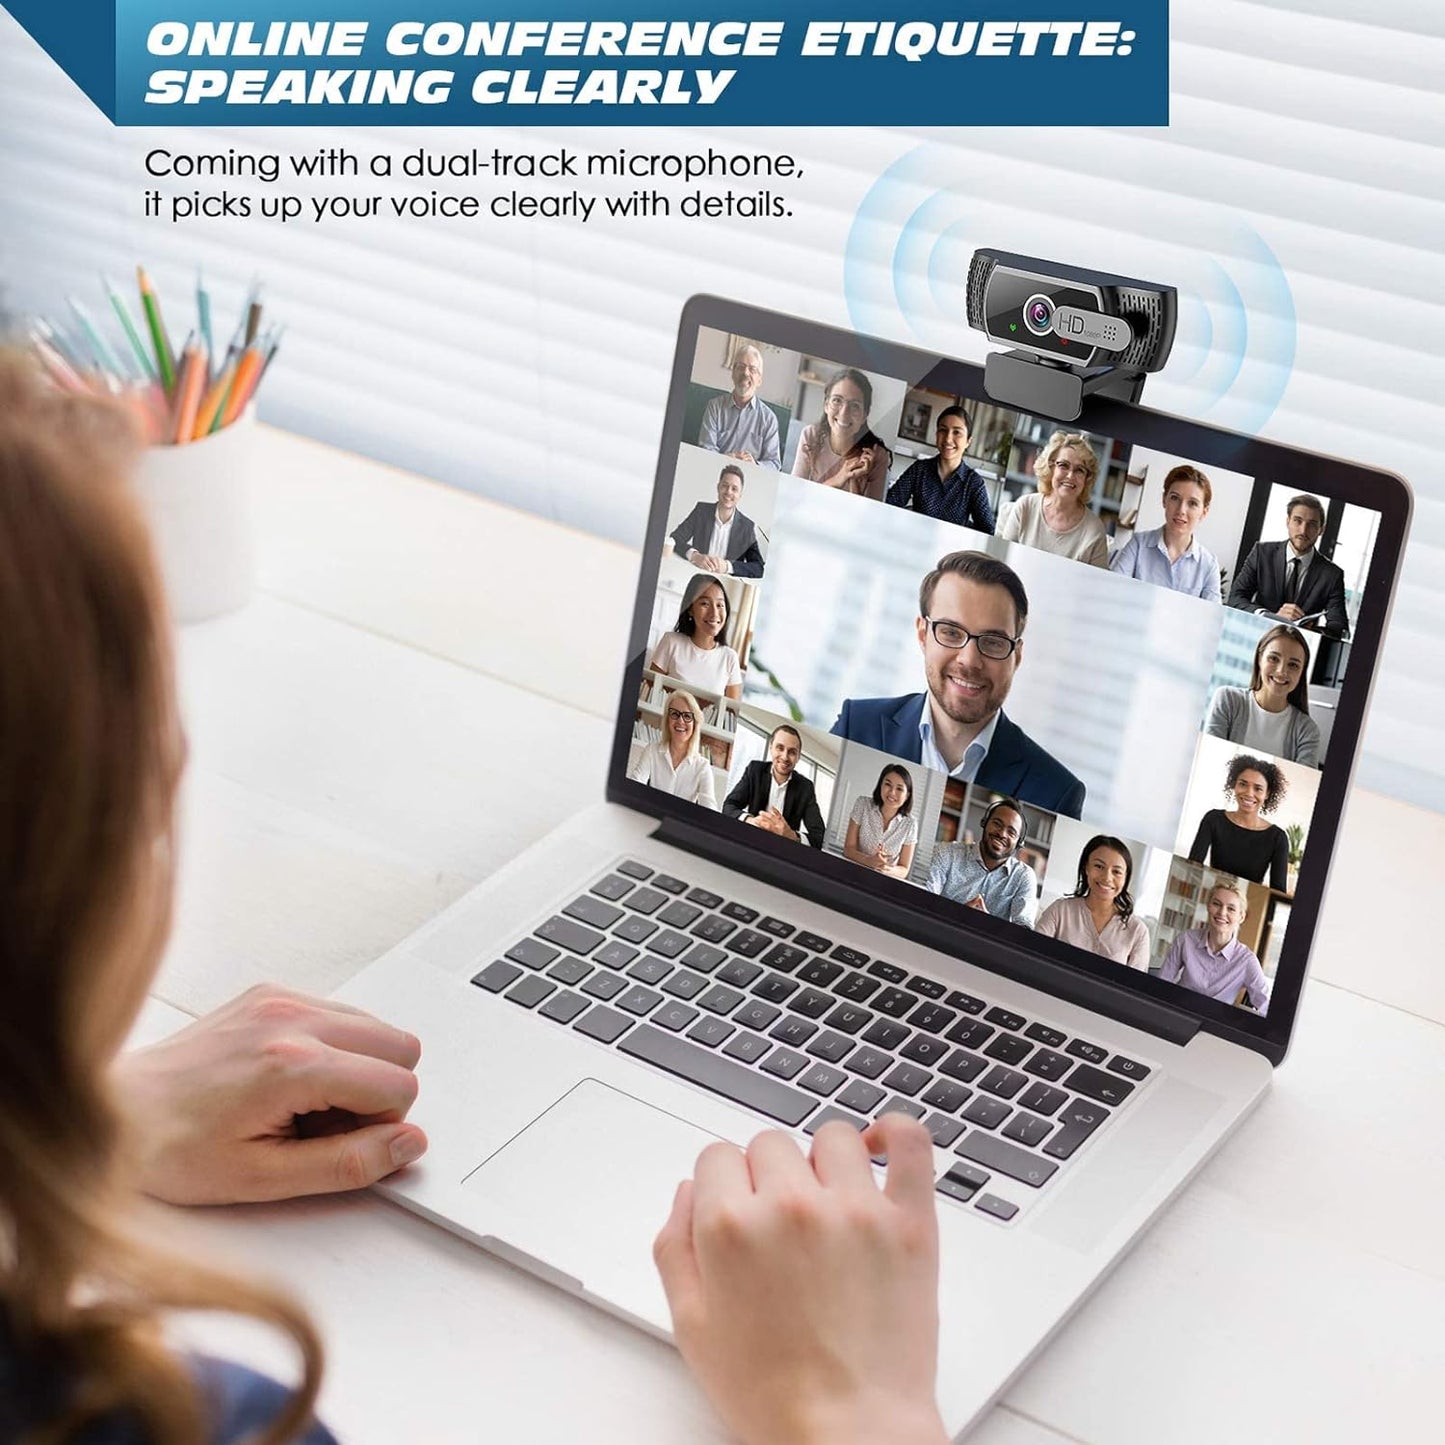 "Crystal Clear 1080P FHD Webcam with Privacy Cover and Mounts - Perfect for Video Conferences on PC and Laptop!"